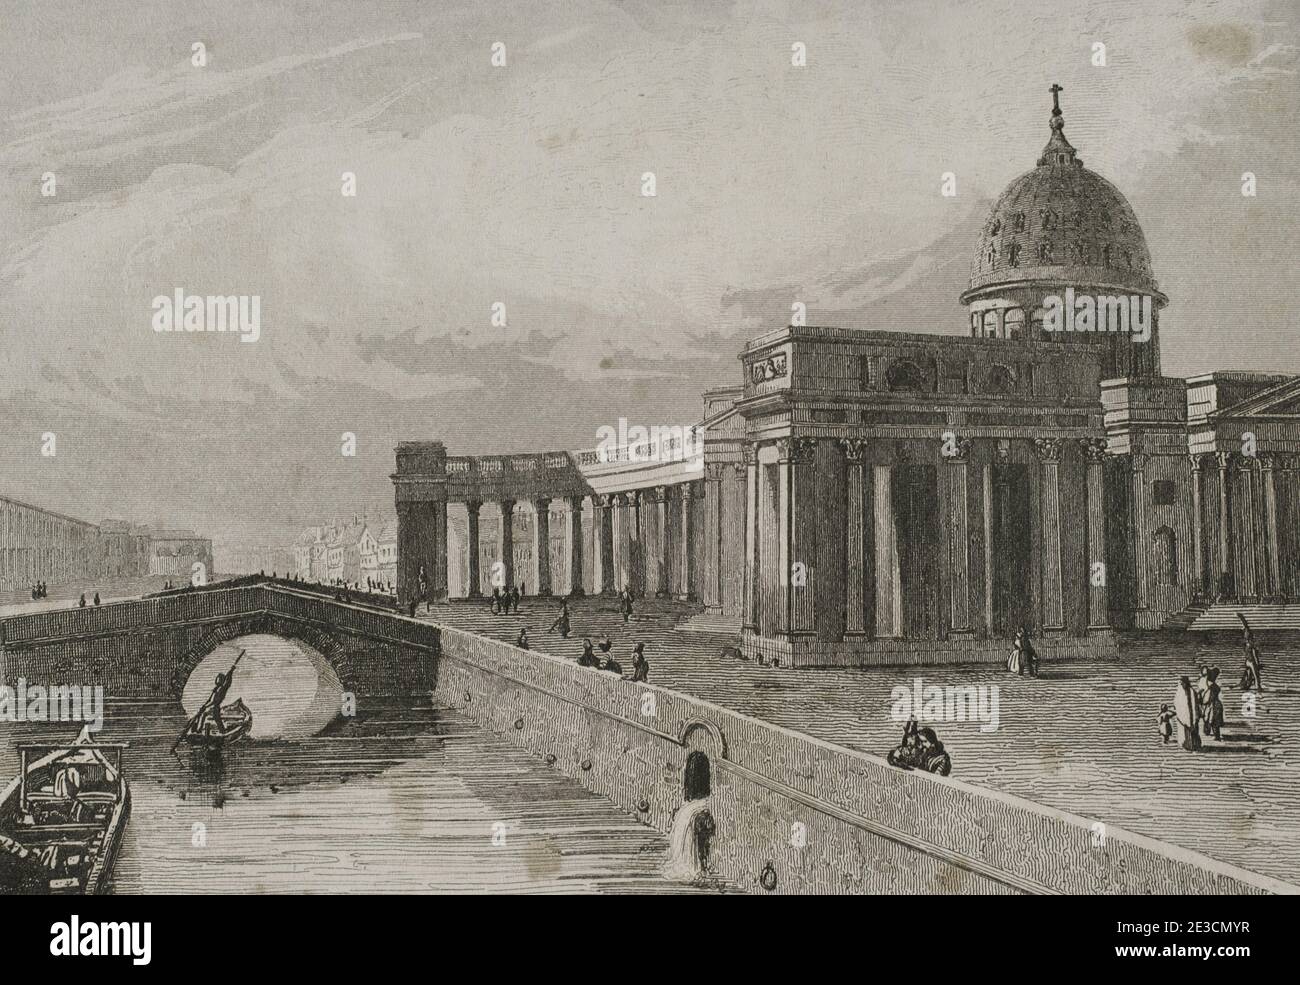 Russia, Saint Petersburg, Kazan Cathedral or Kazanskiy Kafedralniy Sobor.  It was constructed between 1801 and 1811 by the architect Andrei  Voronikhin. Engraving by Lemaitre, Dumouza and Gibert. History of Russia by  Jean